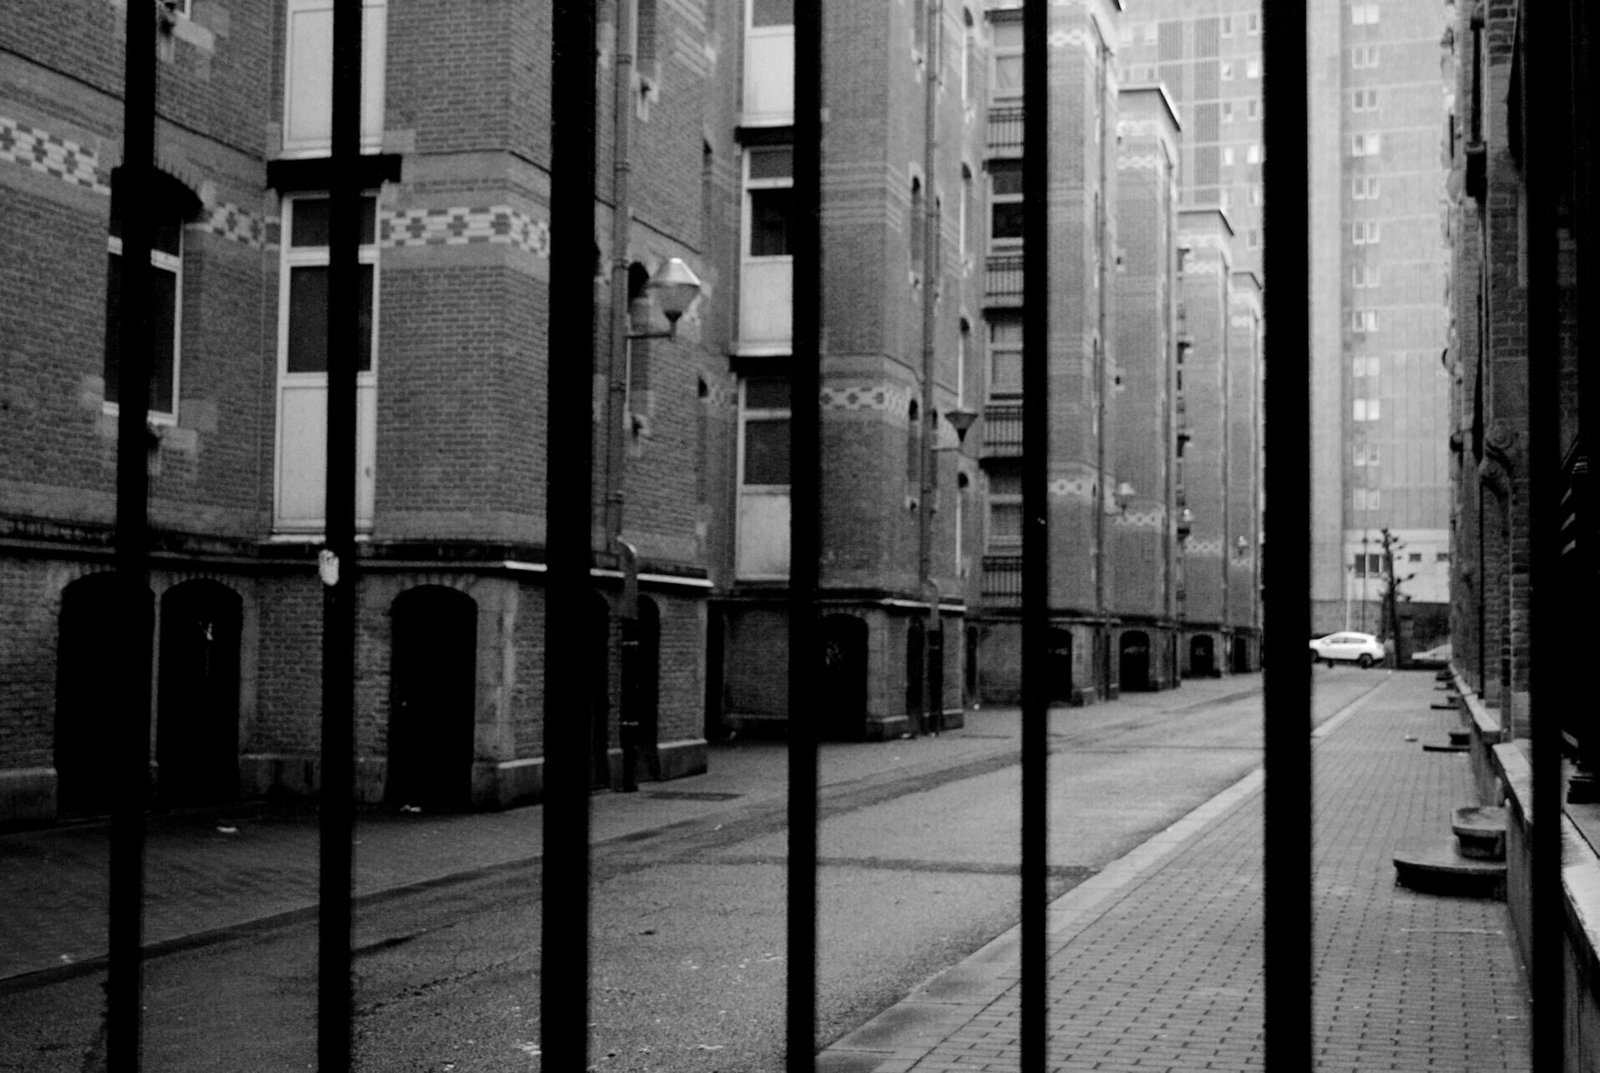 This photo does not show a real prison, it is a shot taken in the Marolles, a well-known district in Brussels, which unfortunately has not such a good reputation for some time. Years ago when this photo was taken (somewhere in 2015) you could still walk around with a camera over there, Today you would probably have be robbed very quickly, because the streets are now full of youth rascals, gangs and drug users.